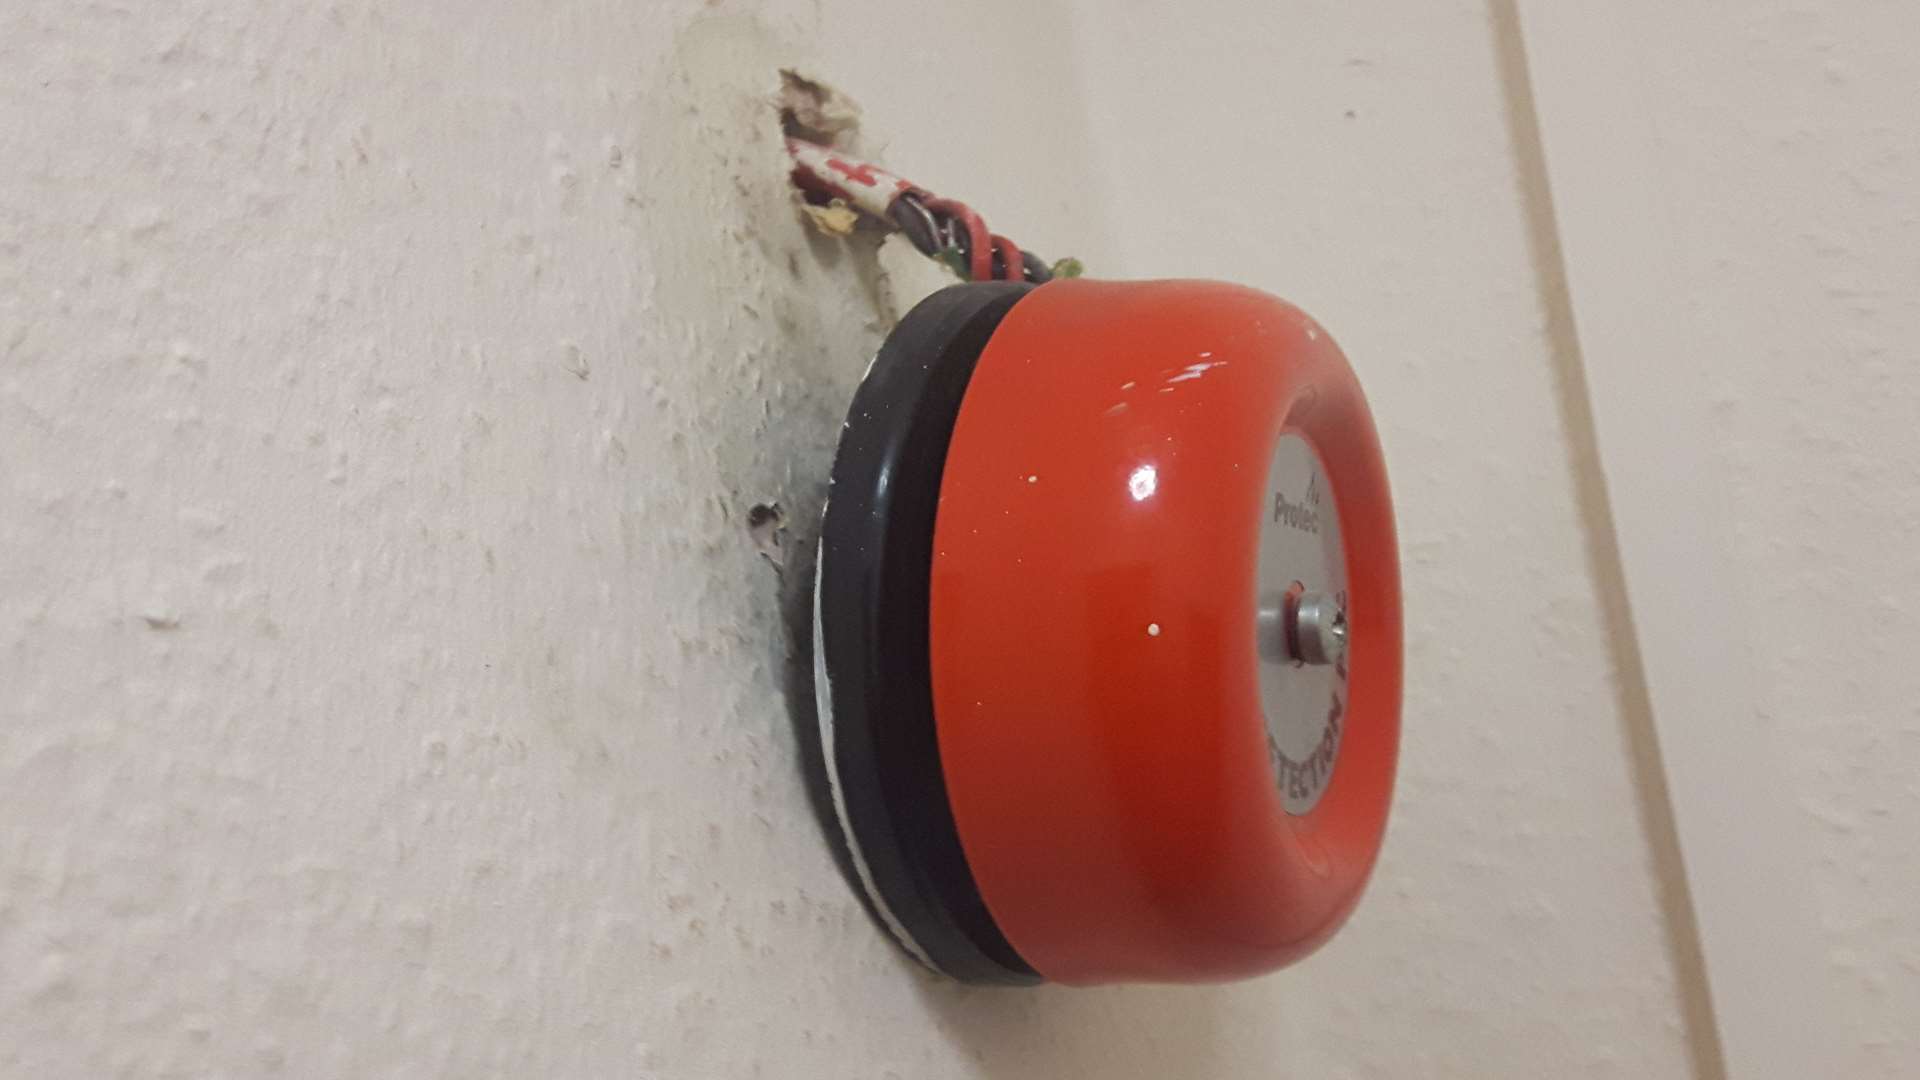 A fire alarm is hanging off the wall